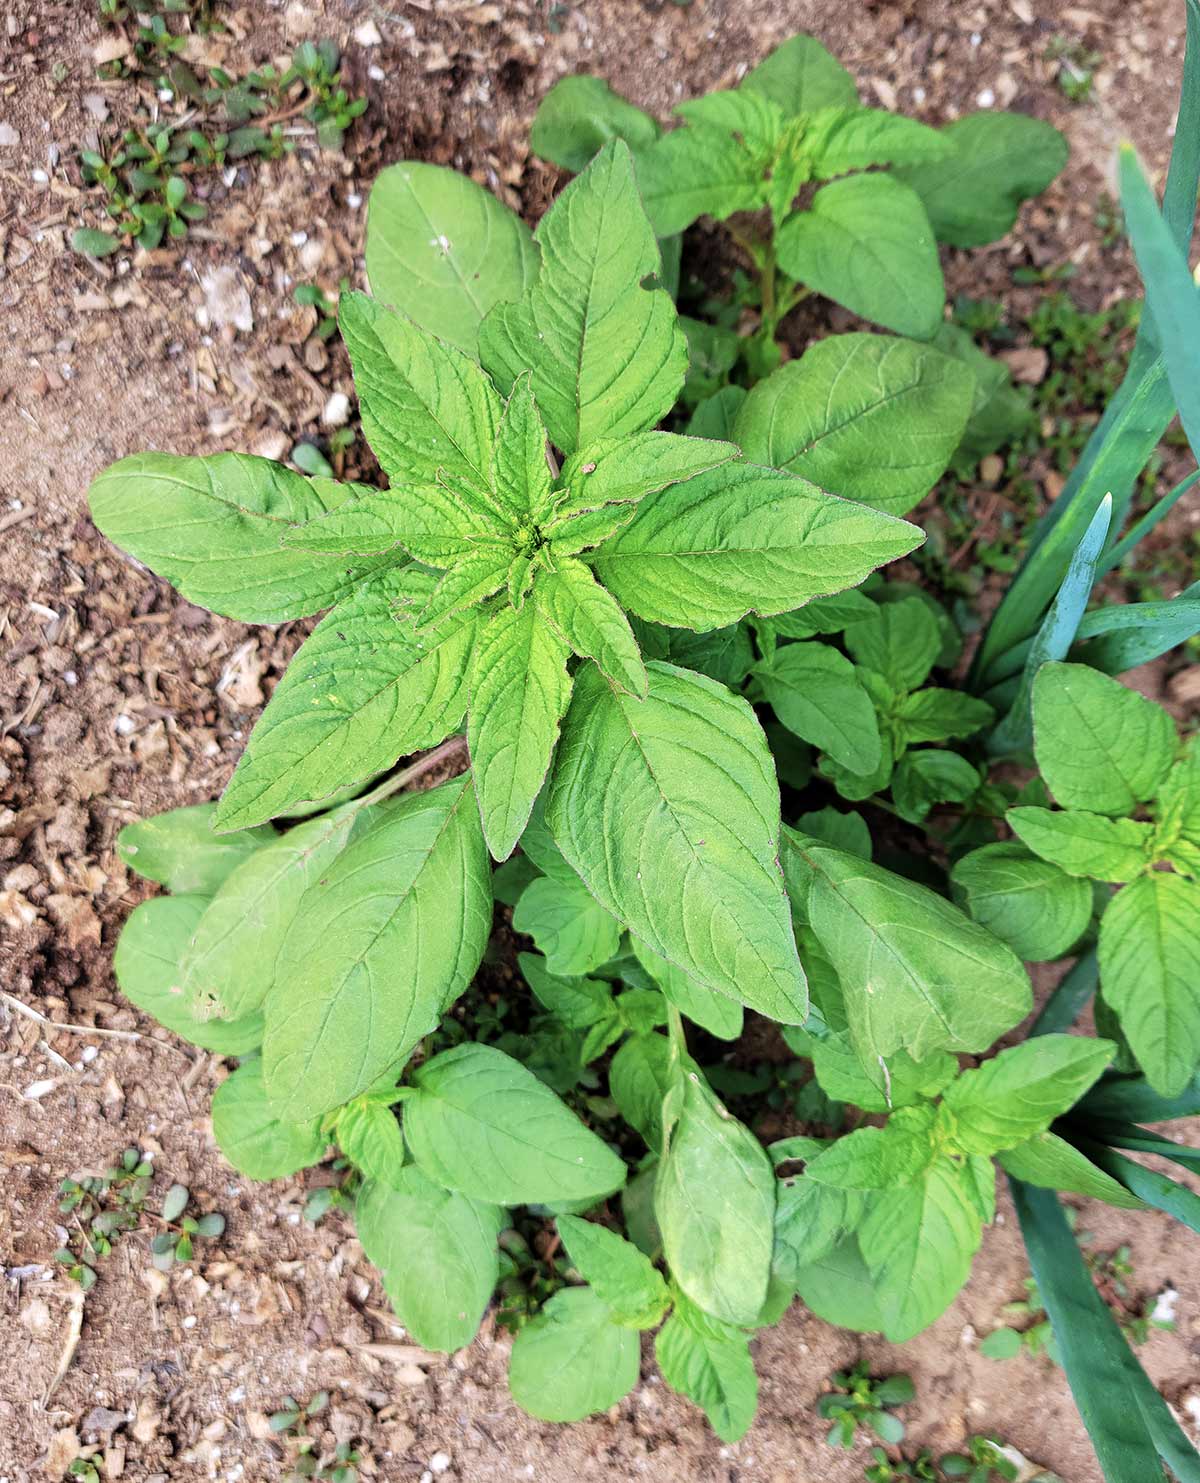 Common amaranth greens growing in the garden. 